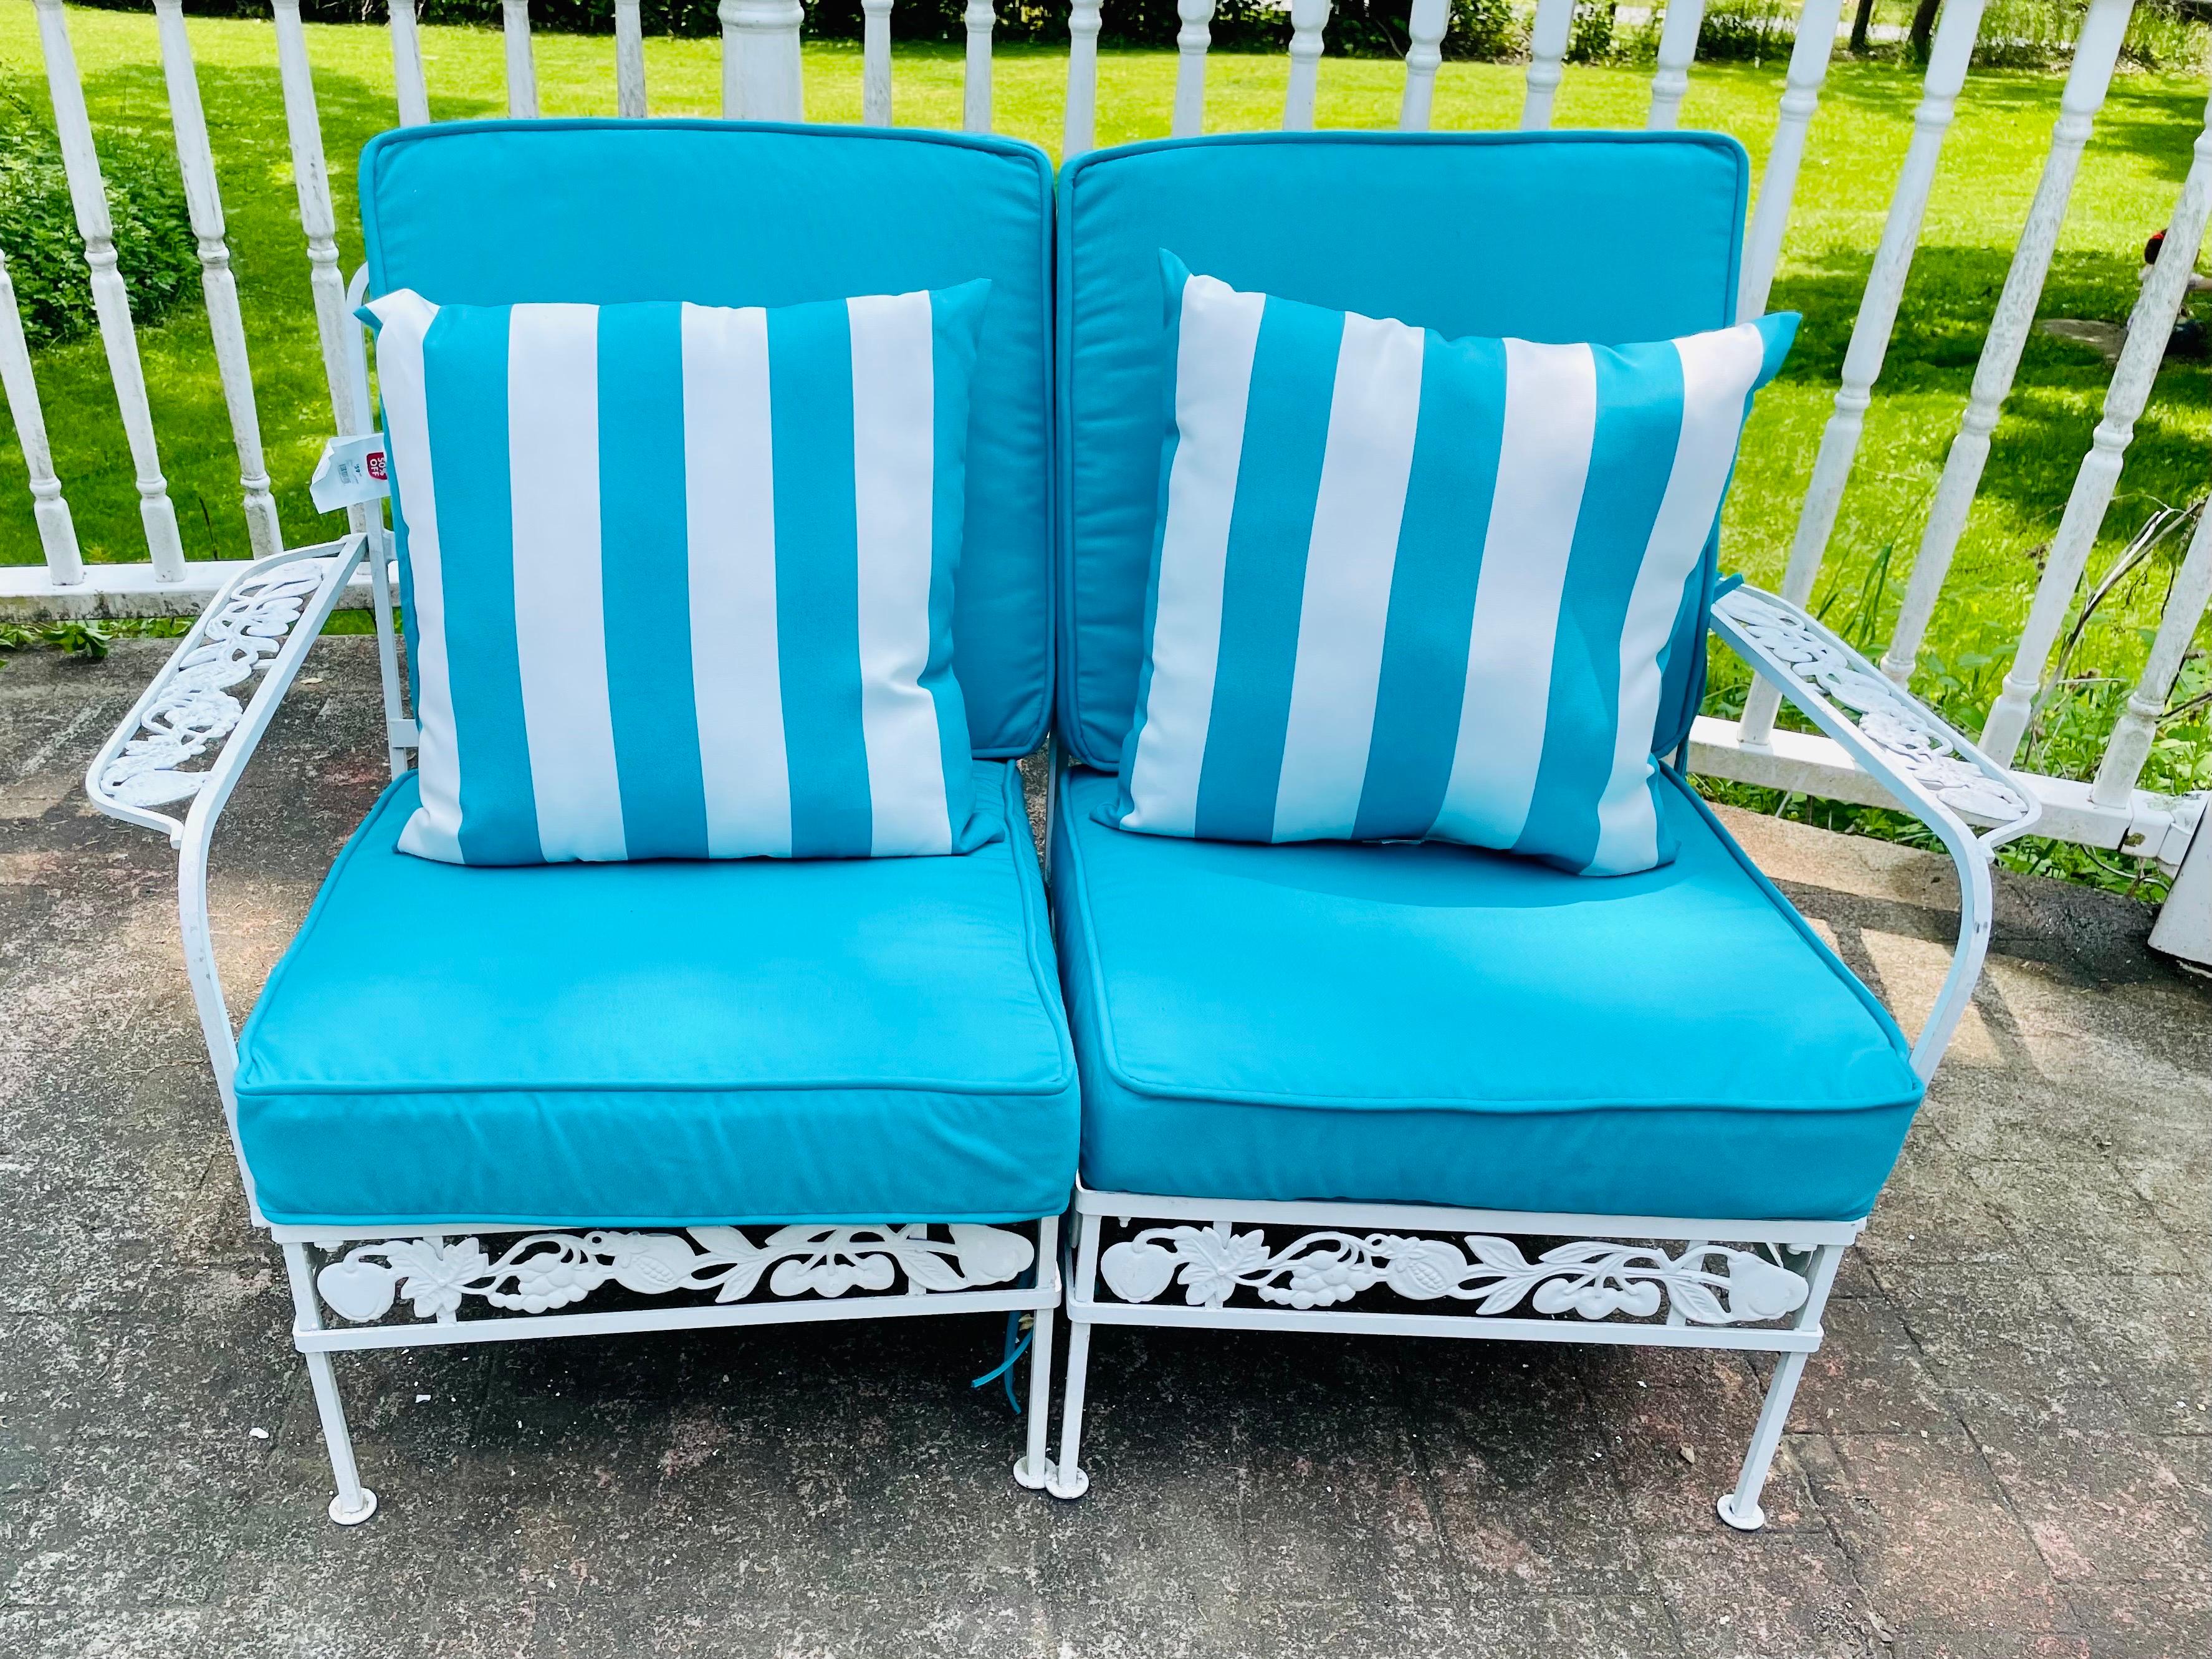 Salterini Style Patio Seating

In stock and ready to ship this 6 piece metal versatile patio set ready for you to enjoy. Perfect for any patio, deck, or garden. Create your ideal vintage outdoor living space depending on your guests needs weather